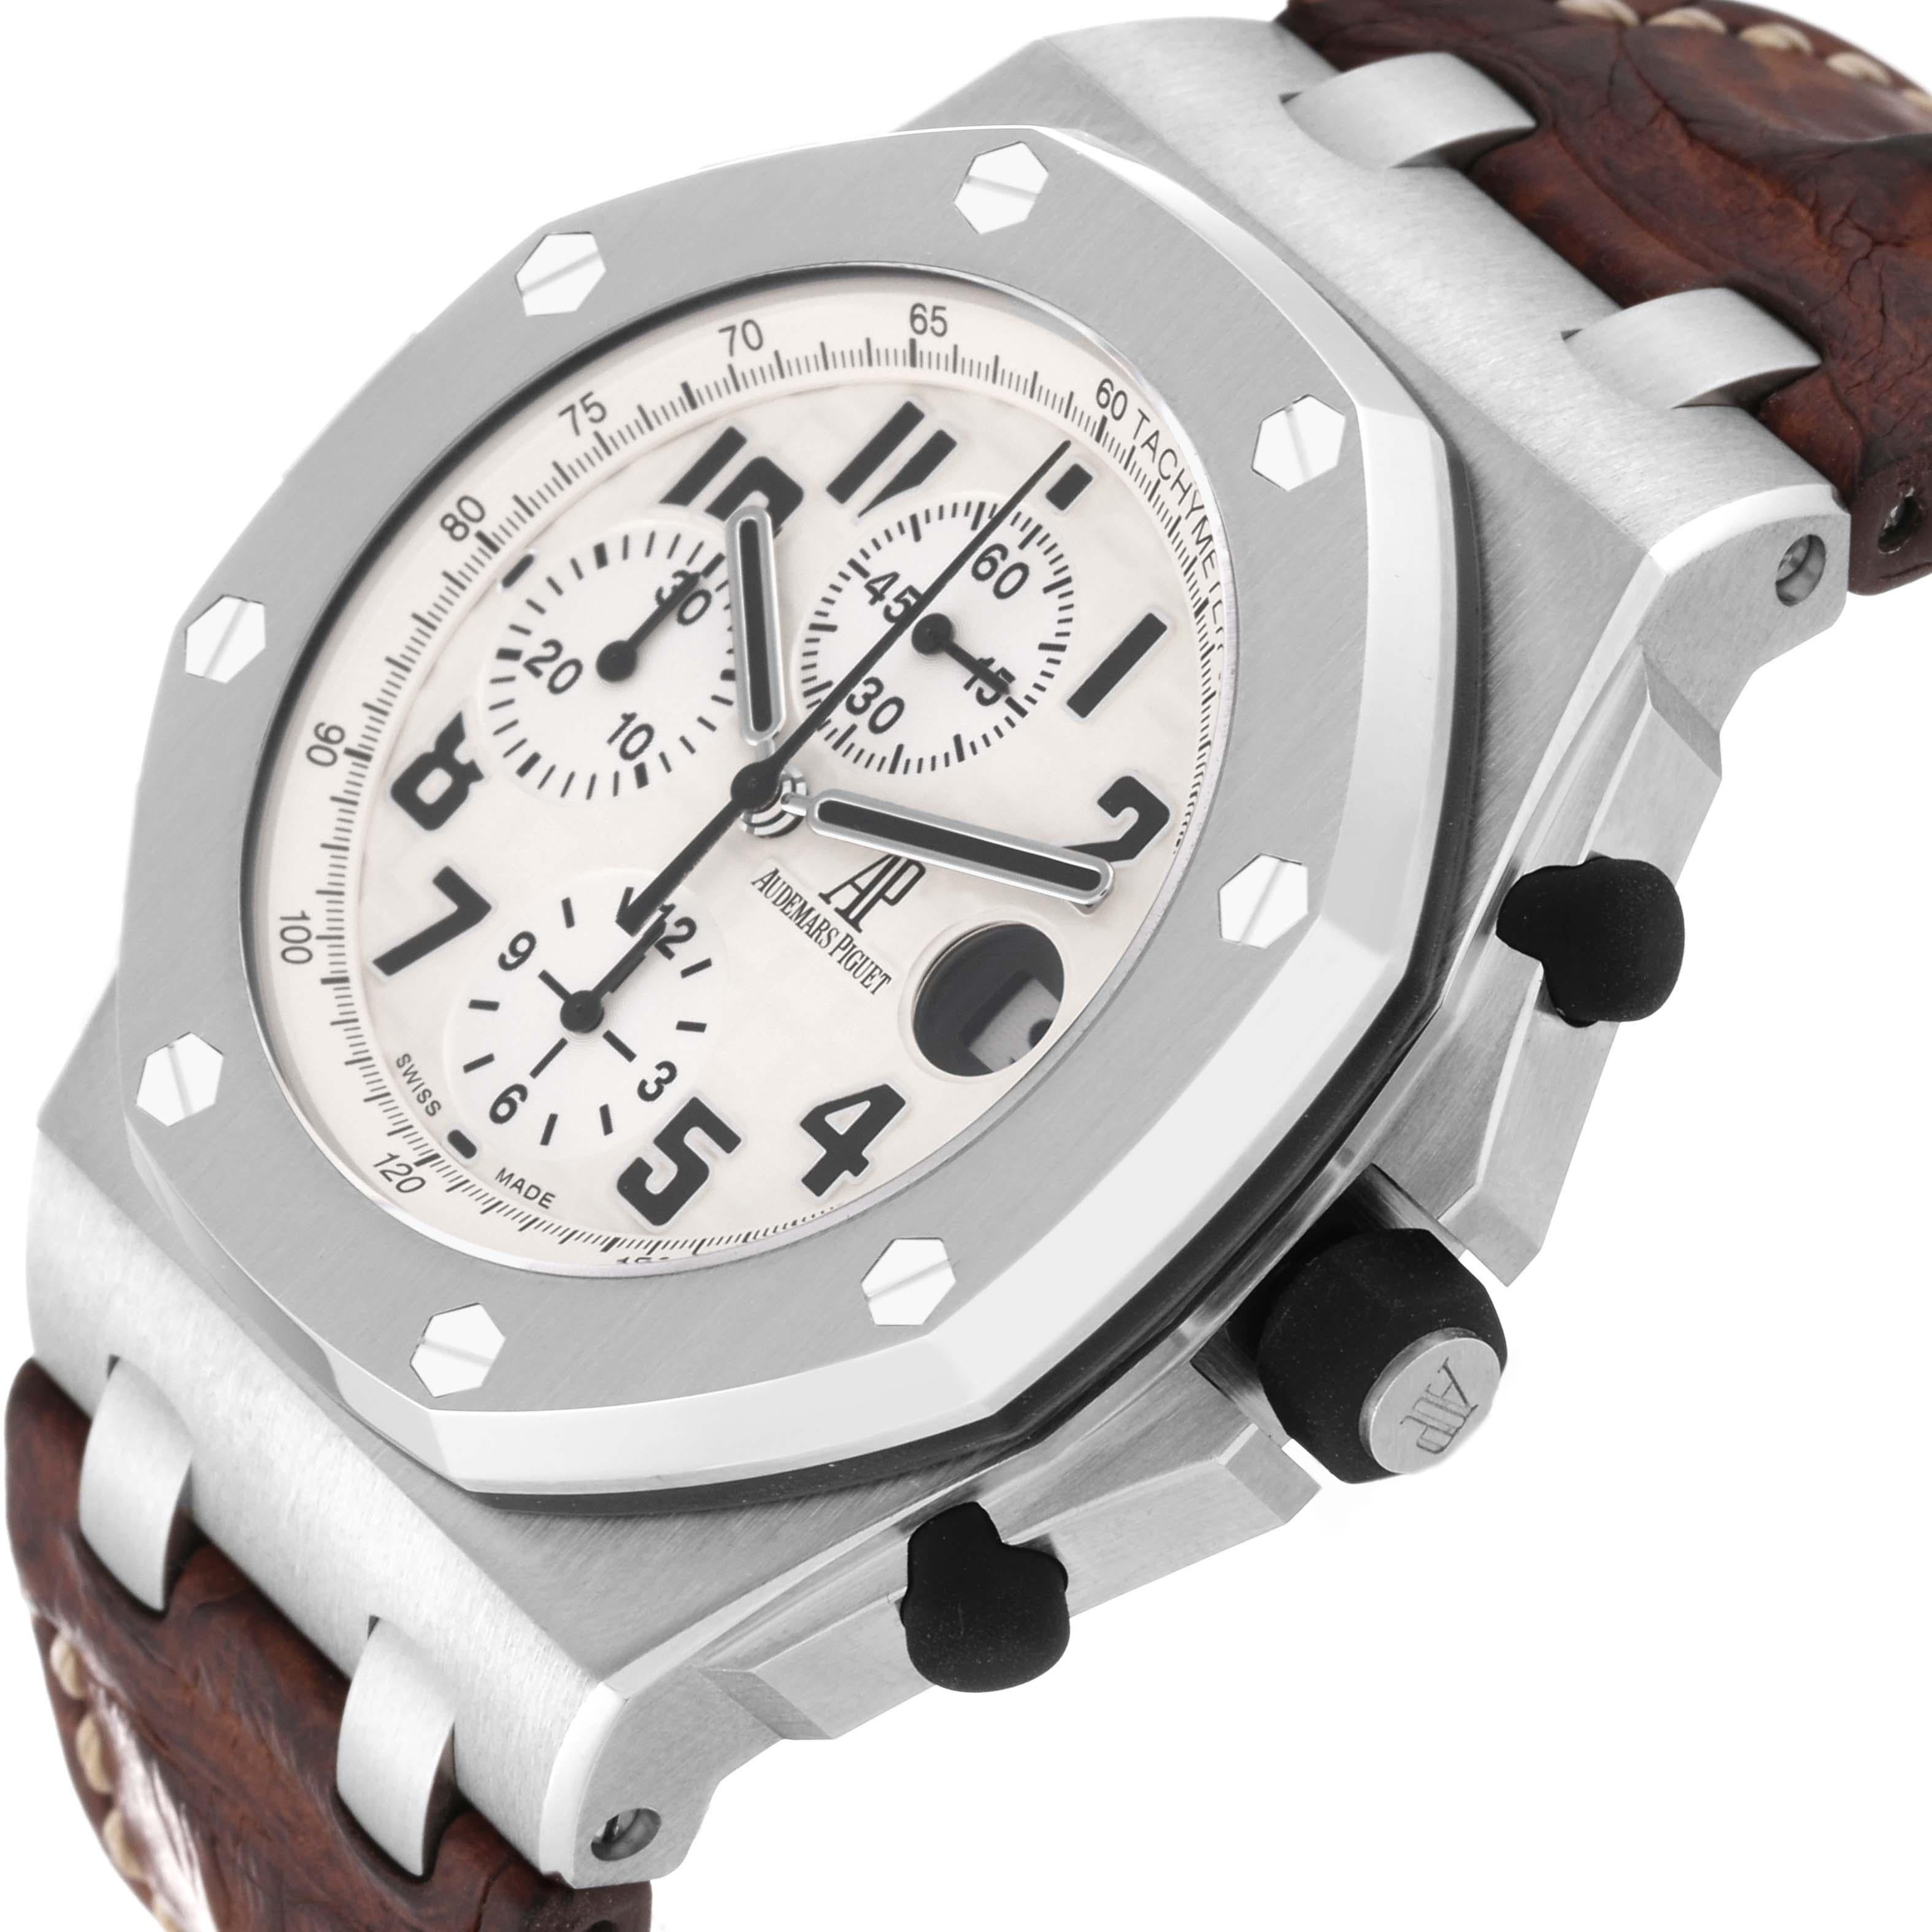 Audemars Piguet Royal Oak Offshore Safari Steel Mens Watch 26170ST Box Papers. Automatic self-winding chronograph movement. Stainless steel octagonal case 42 mm in diameter. Case thickness: 14.2 mm. Solid case back. Black rubber-clad screw-down